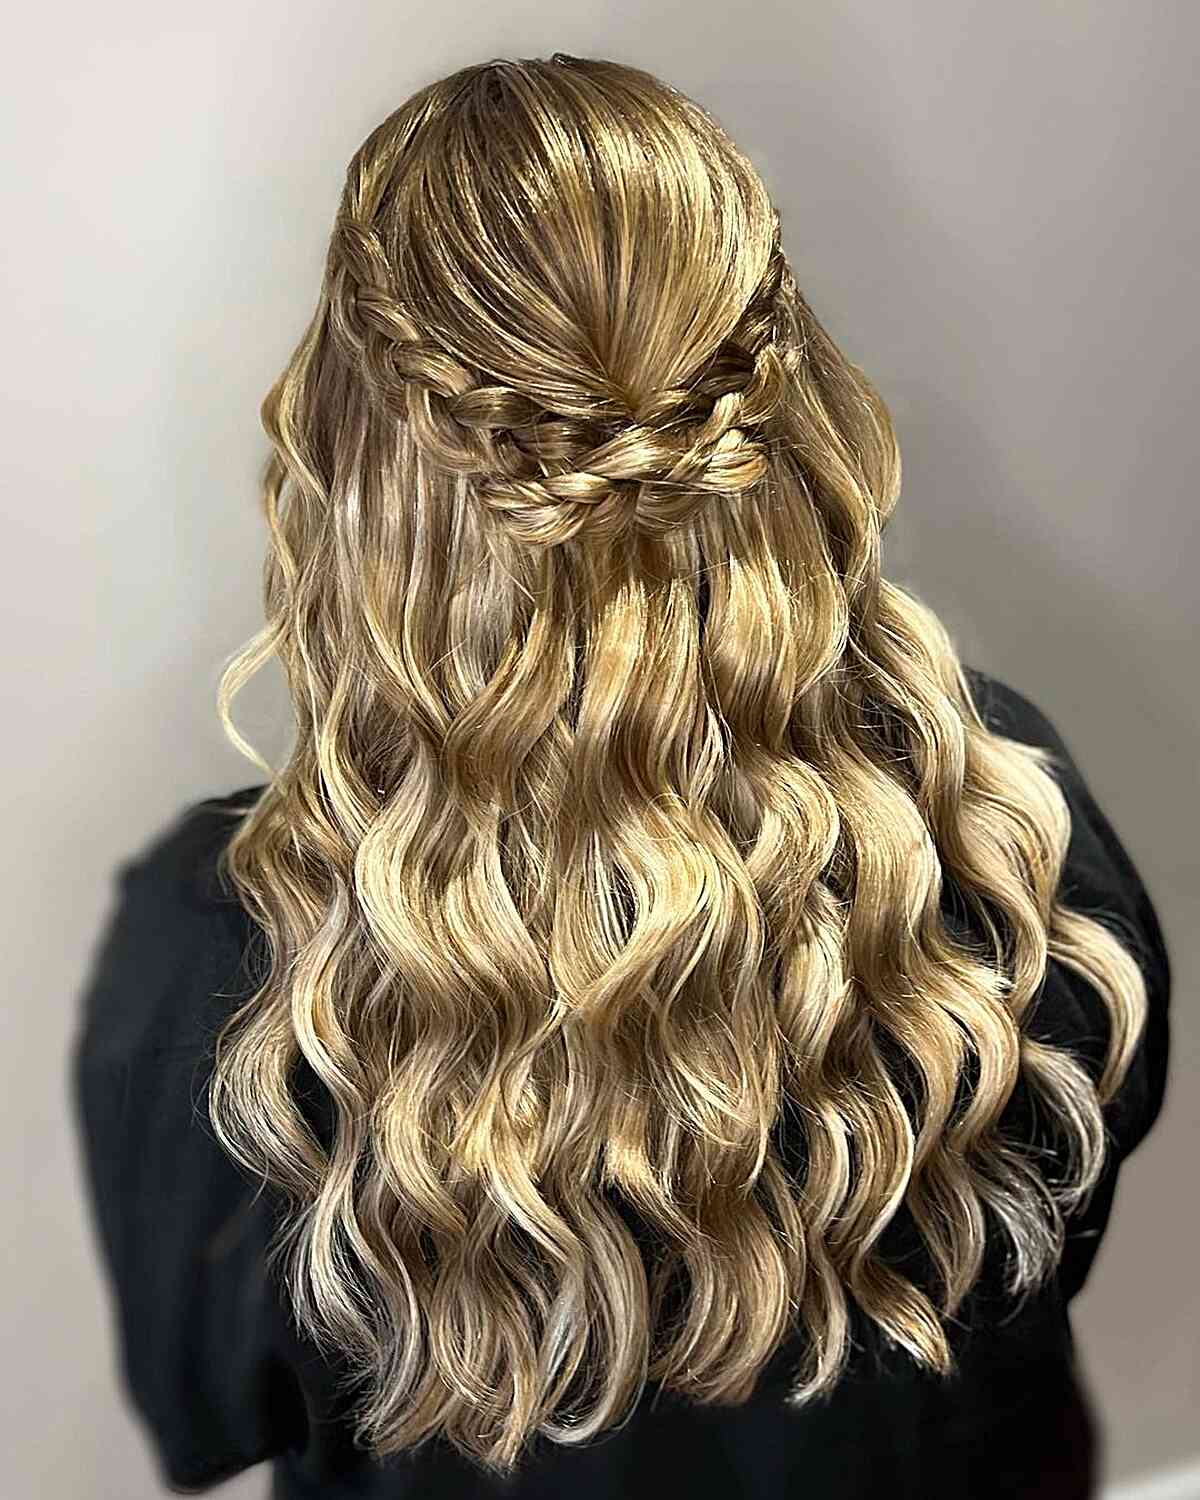 Long Beach Waves and Half-Up Braids and curled ends for Prom Night